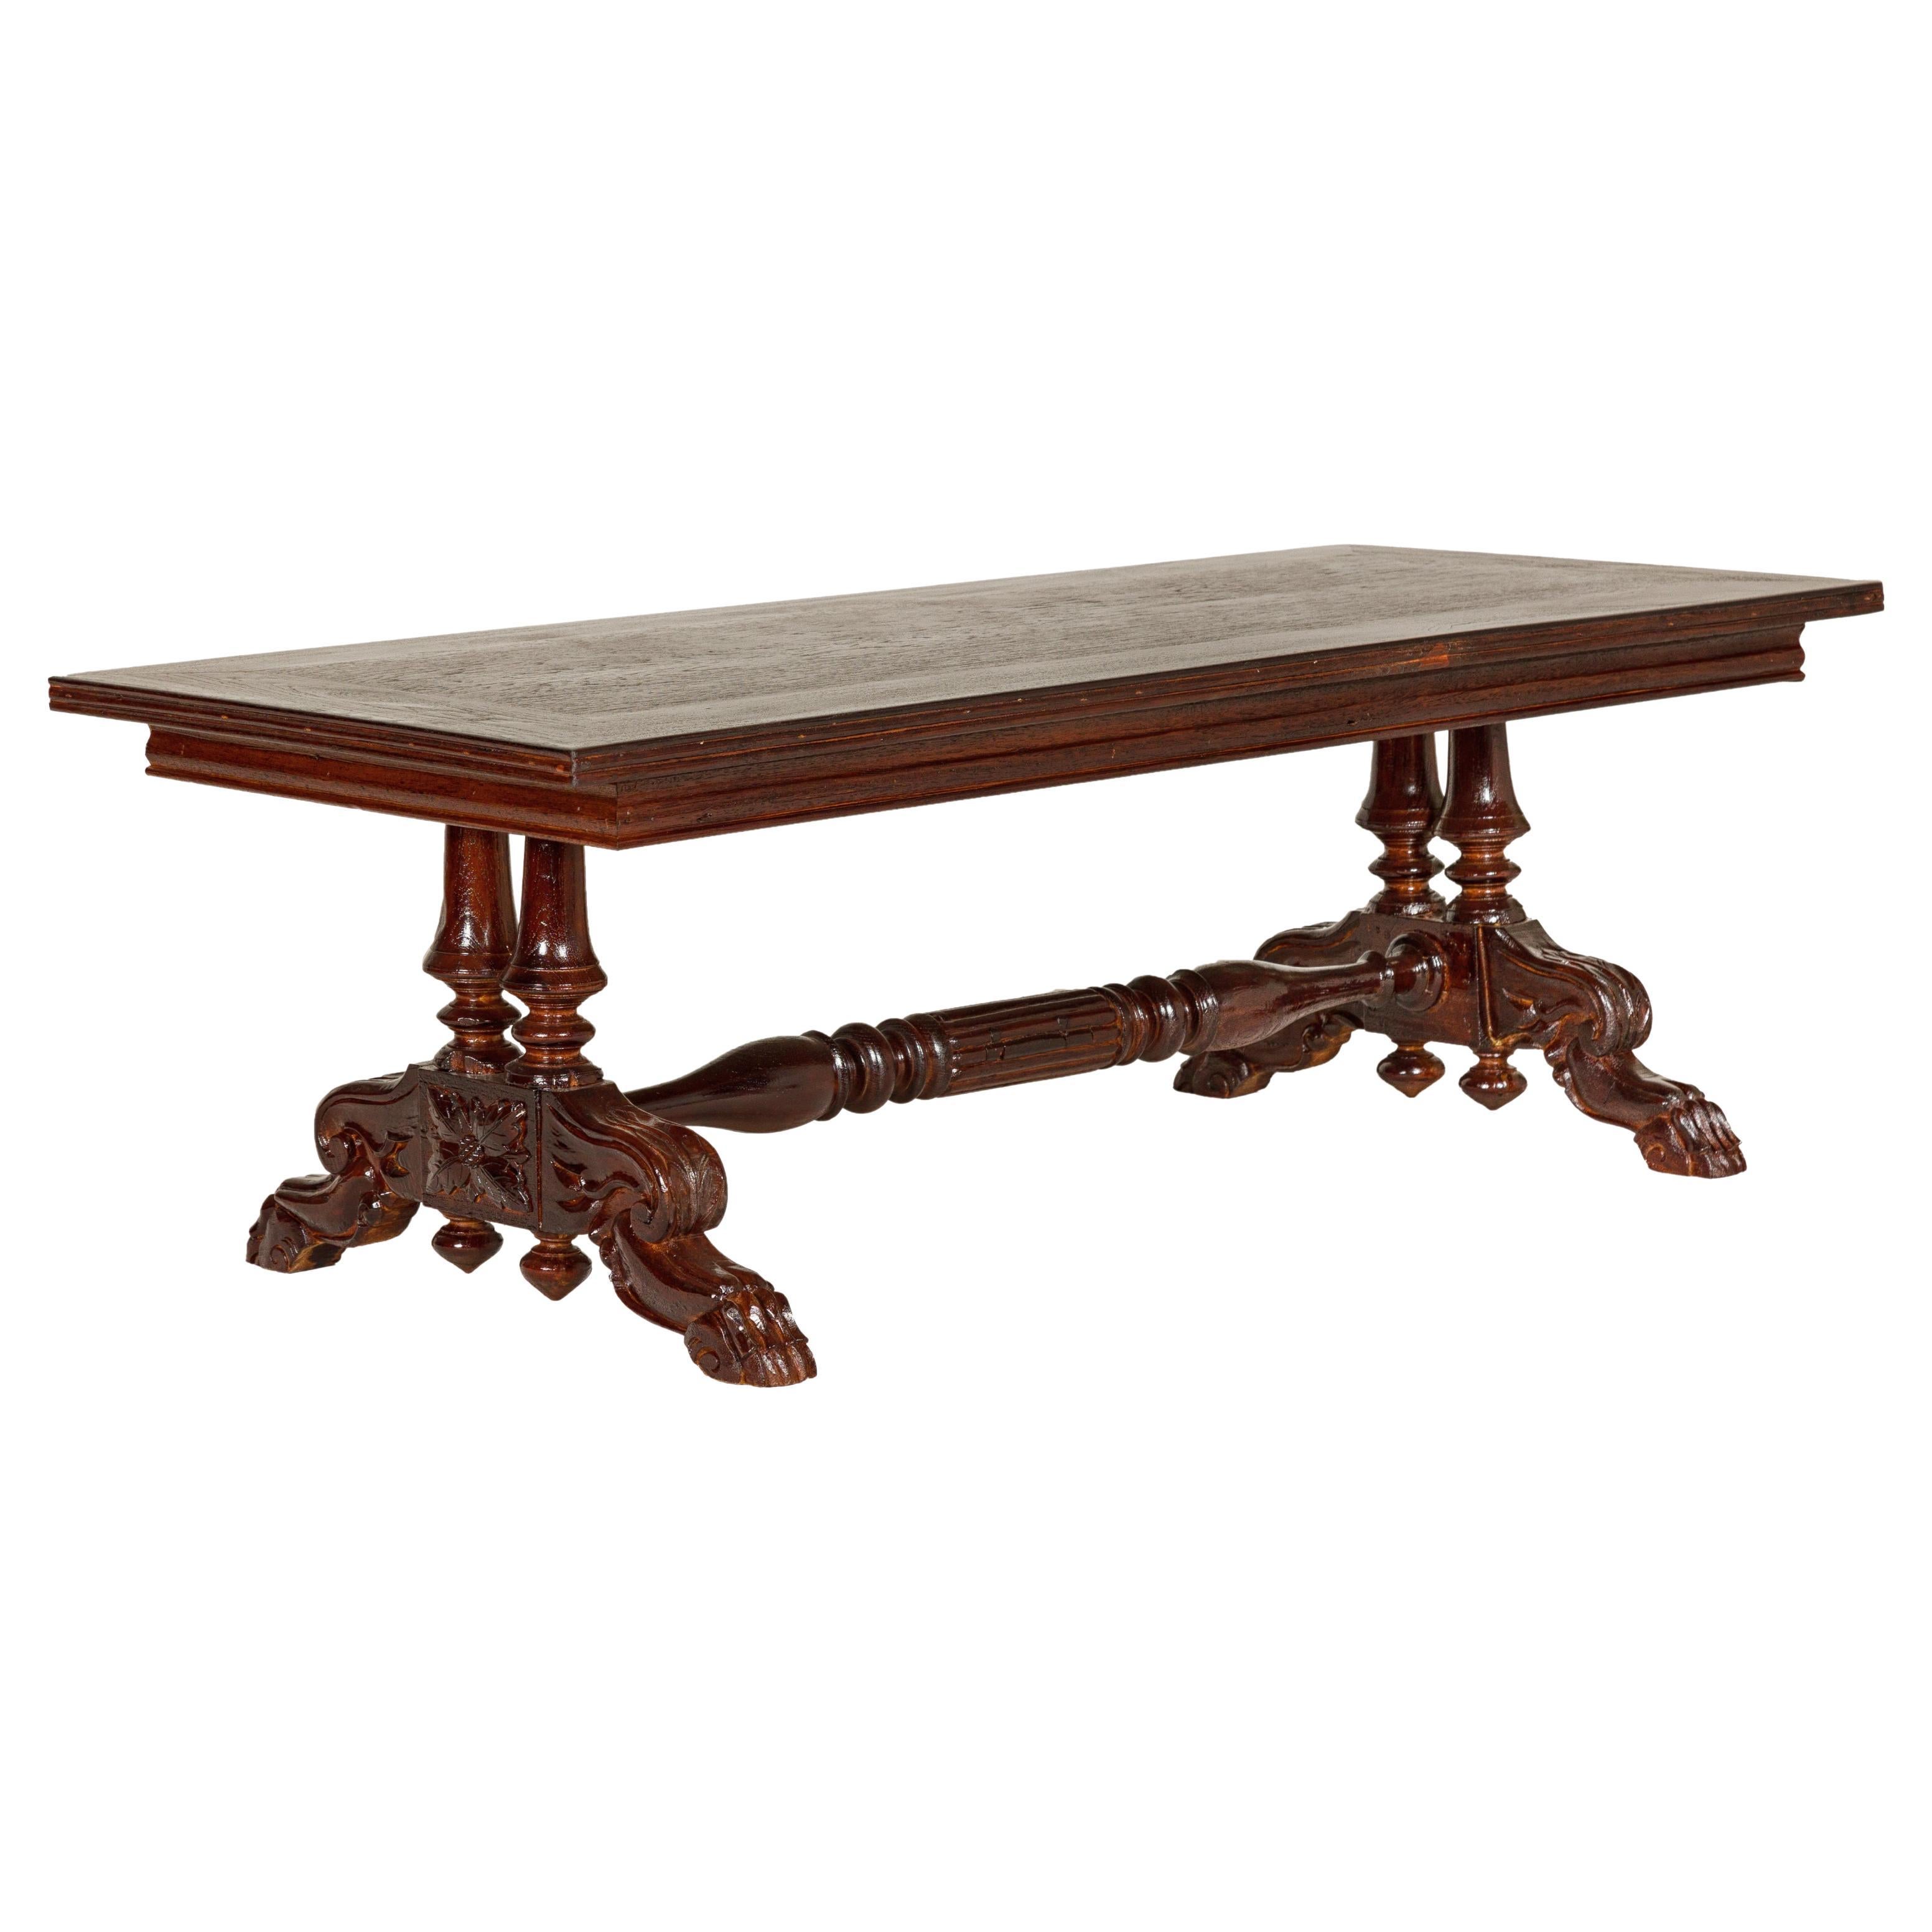 Dutch Colonial Ornate Coffee Table with Carved Lion Paw Legs and Cross Stretcher